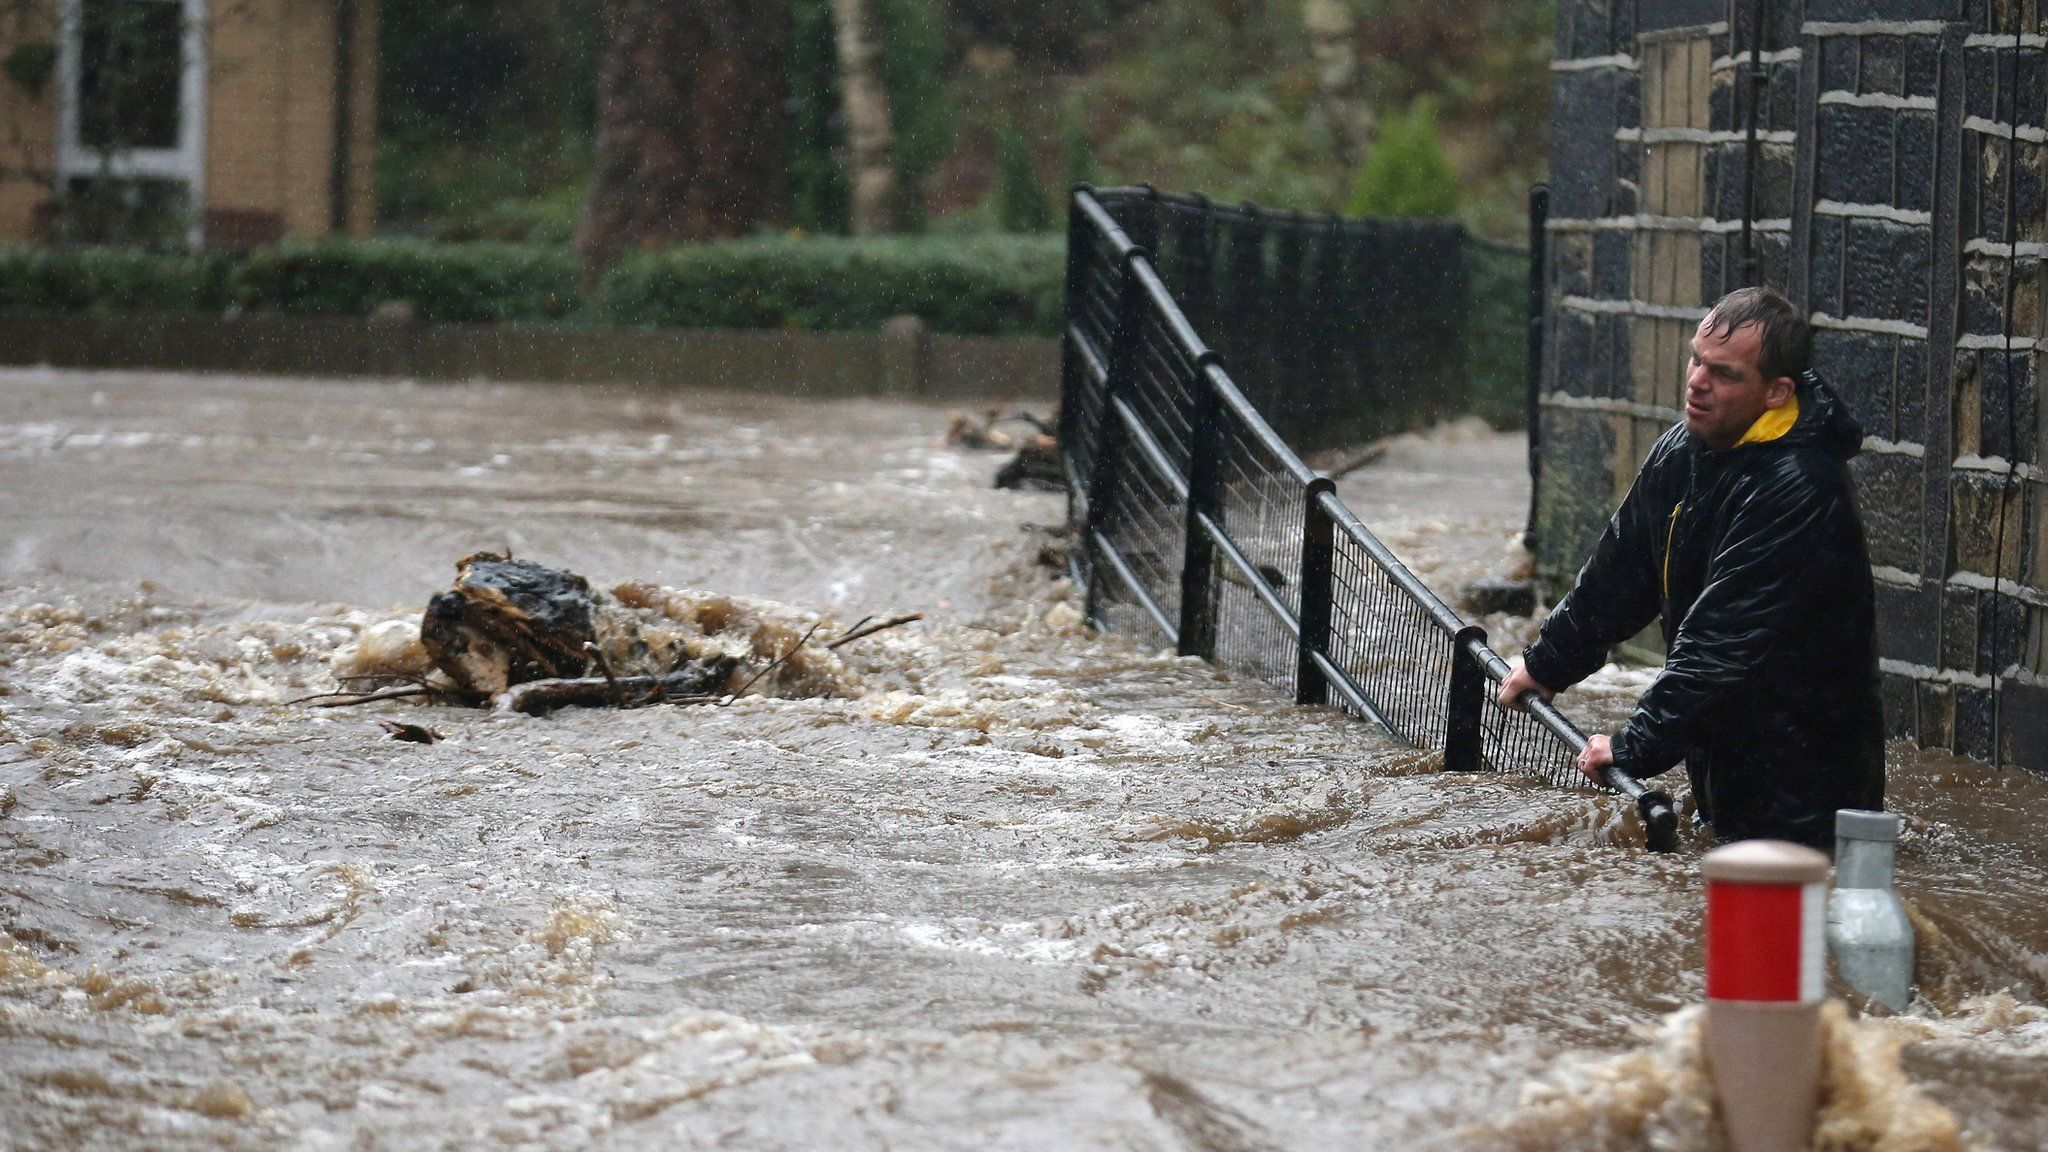 Residents battle against floodwater as the River Calder bursts its banks in the West Yorkshire town of Mytholmroyd on 26 December 2015